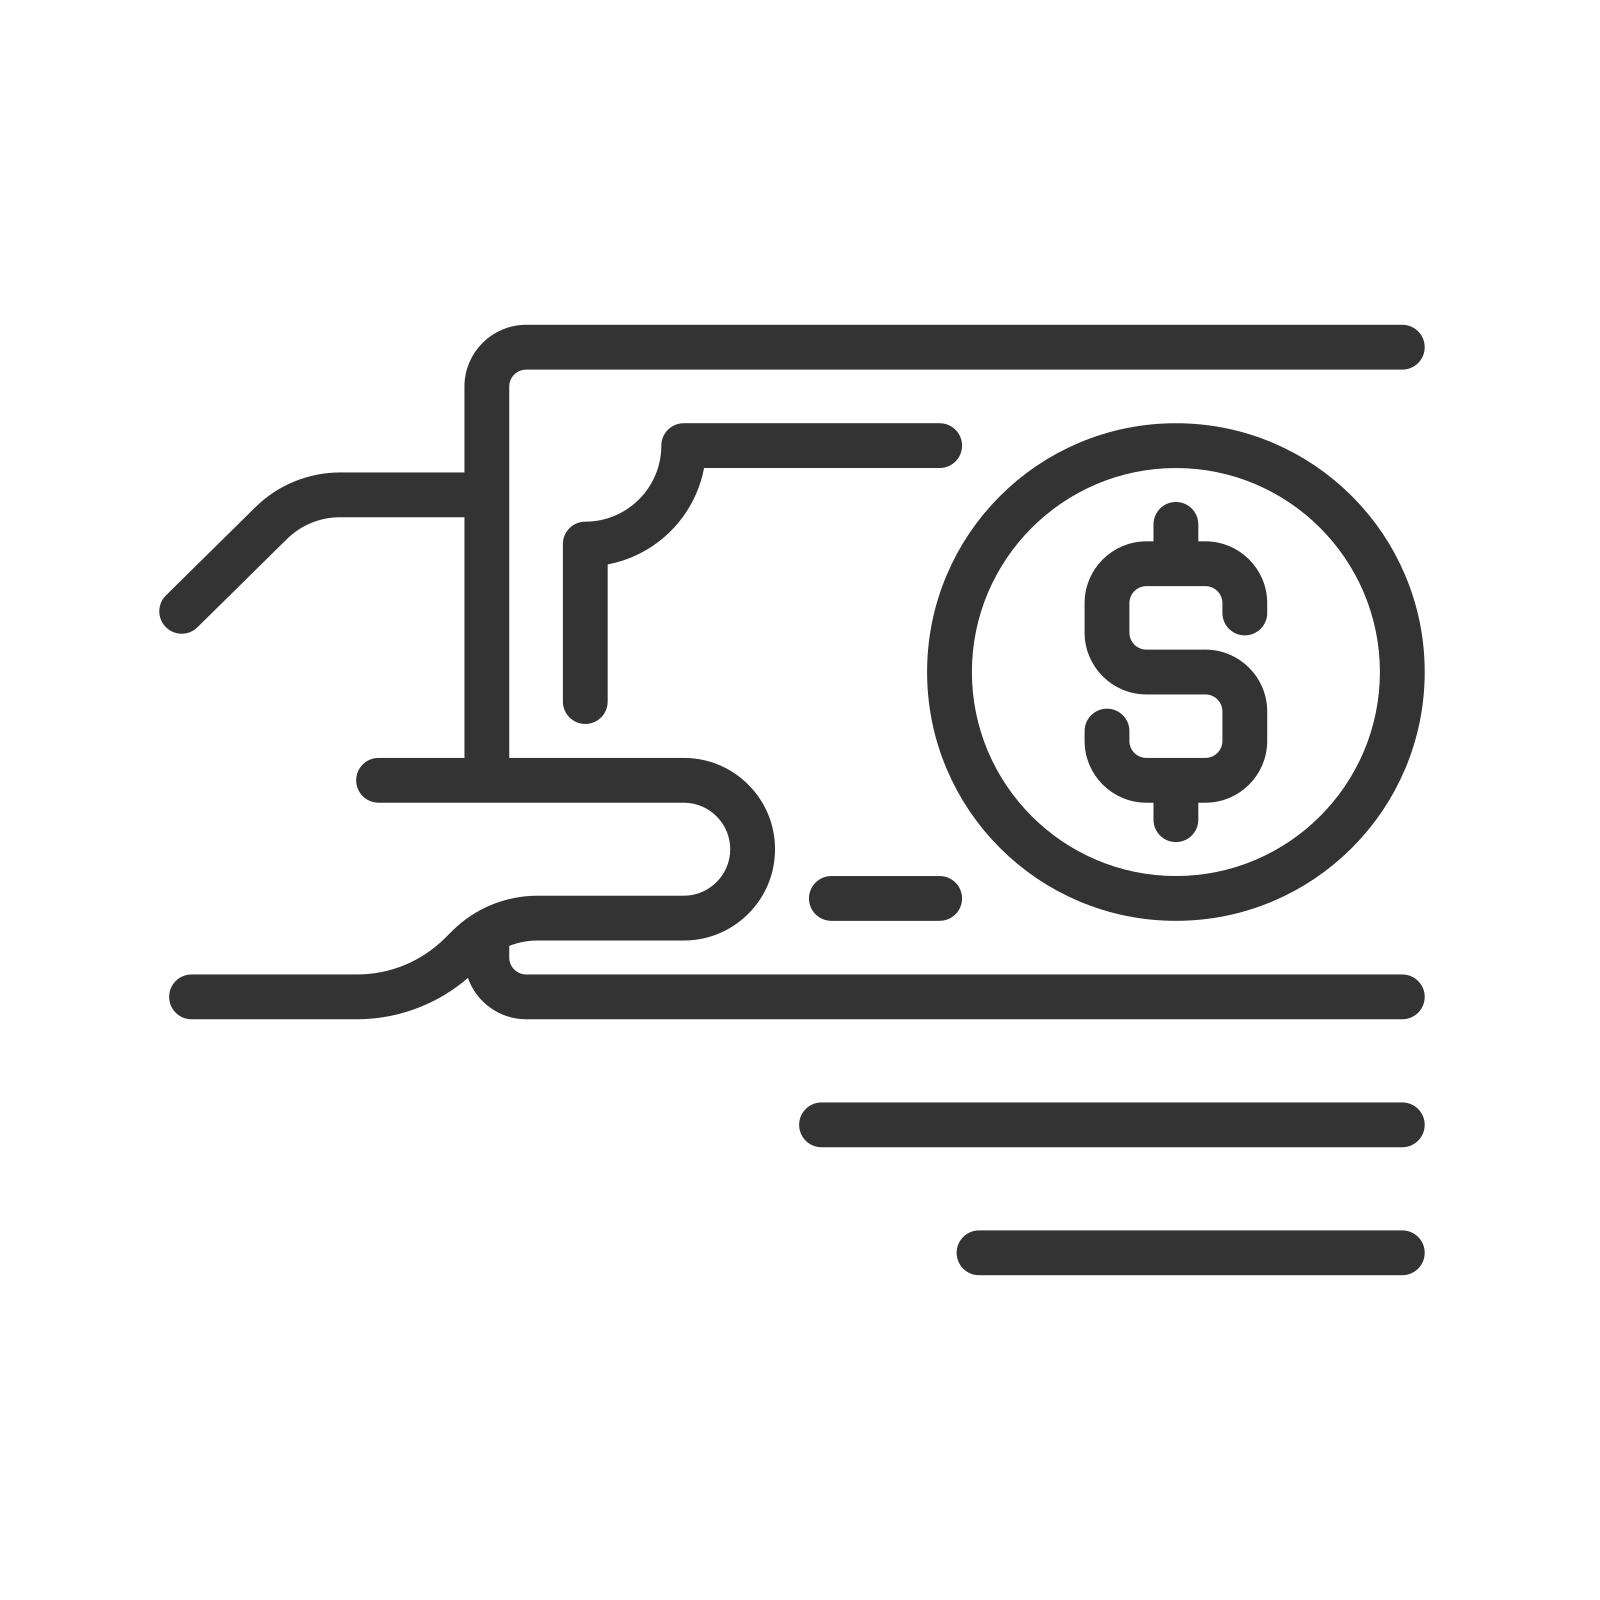 Payment In Cash icon